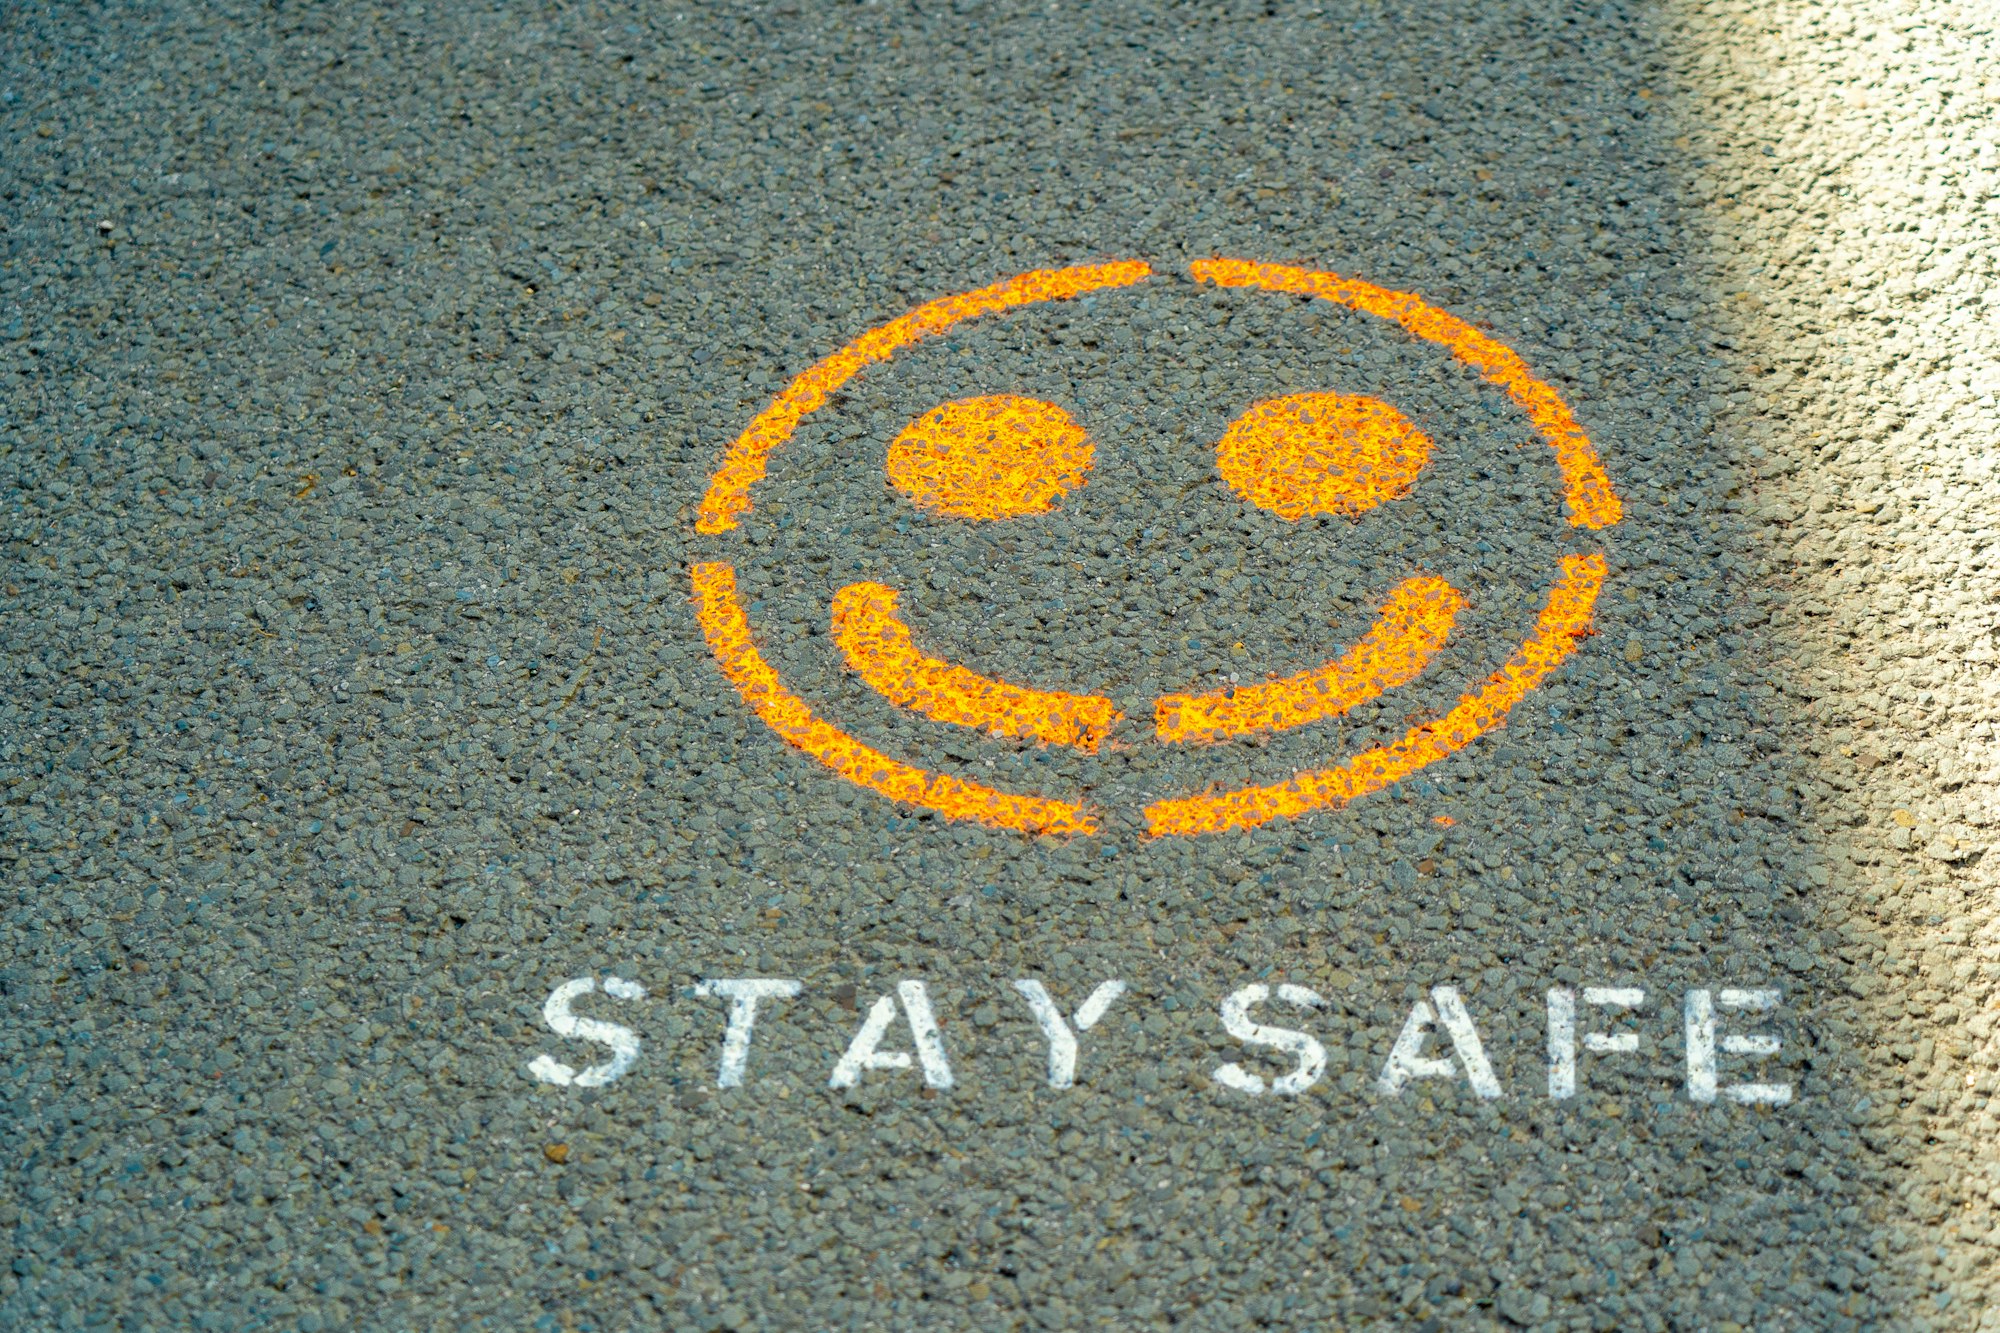 Stay safe.  One of the many street signs that have appeared, to warn people, during the current pandemic.  This one was in the high street of Shaftesbury, which has now been pedestrianised.